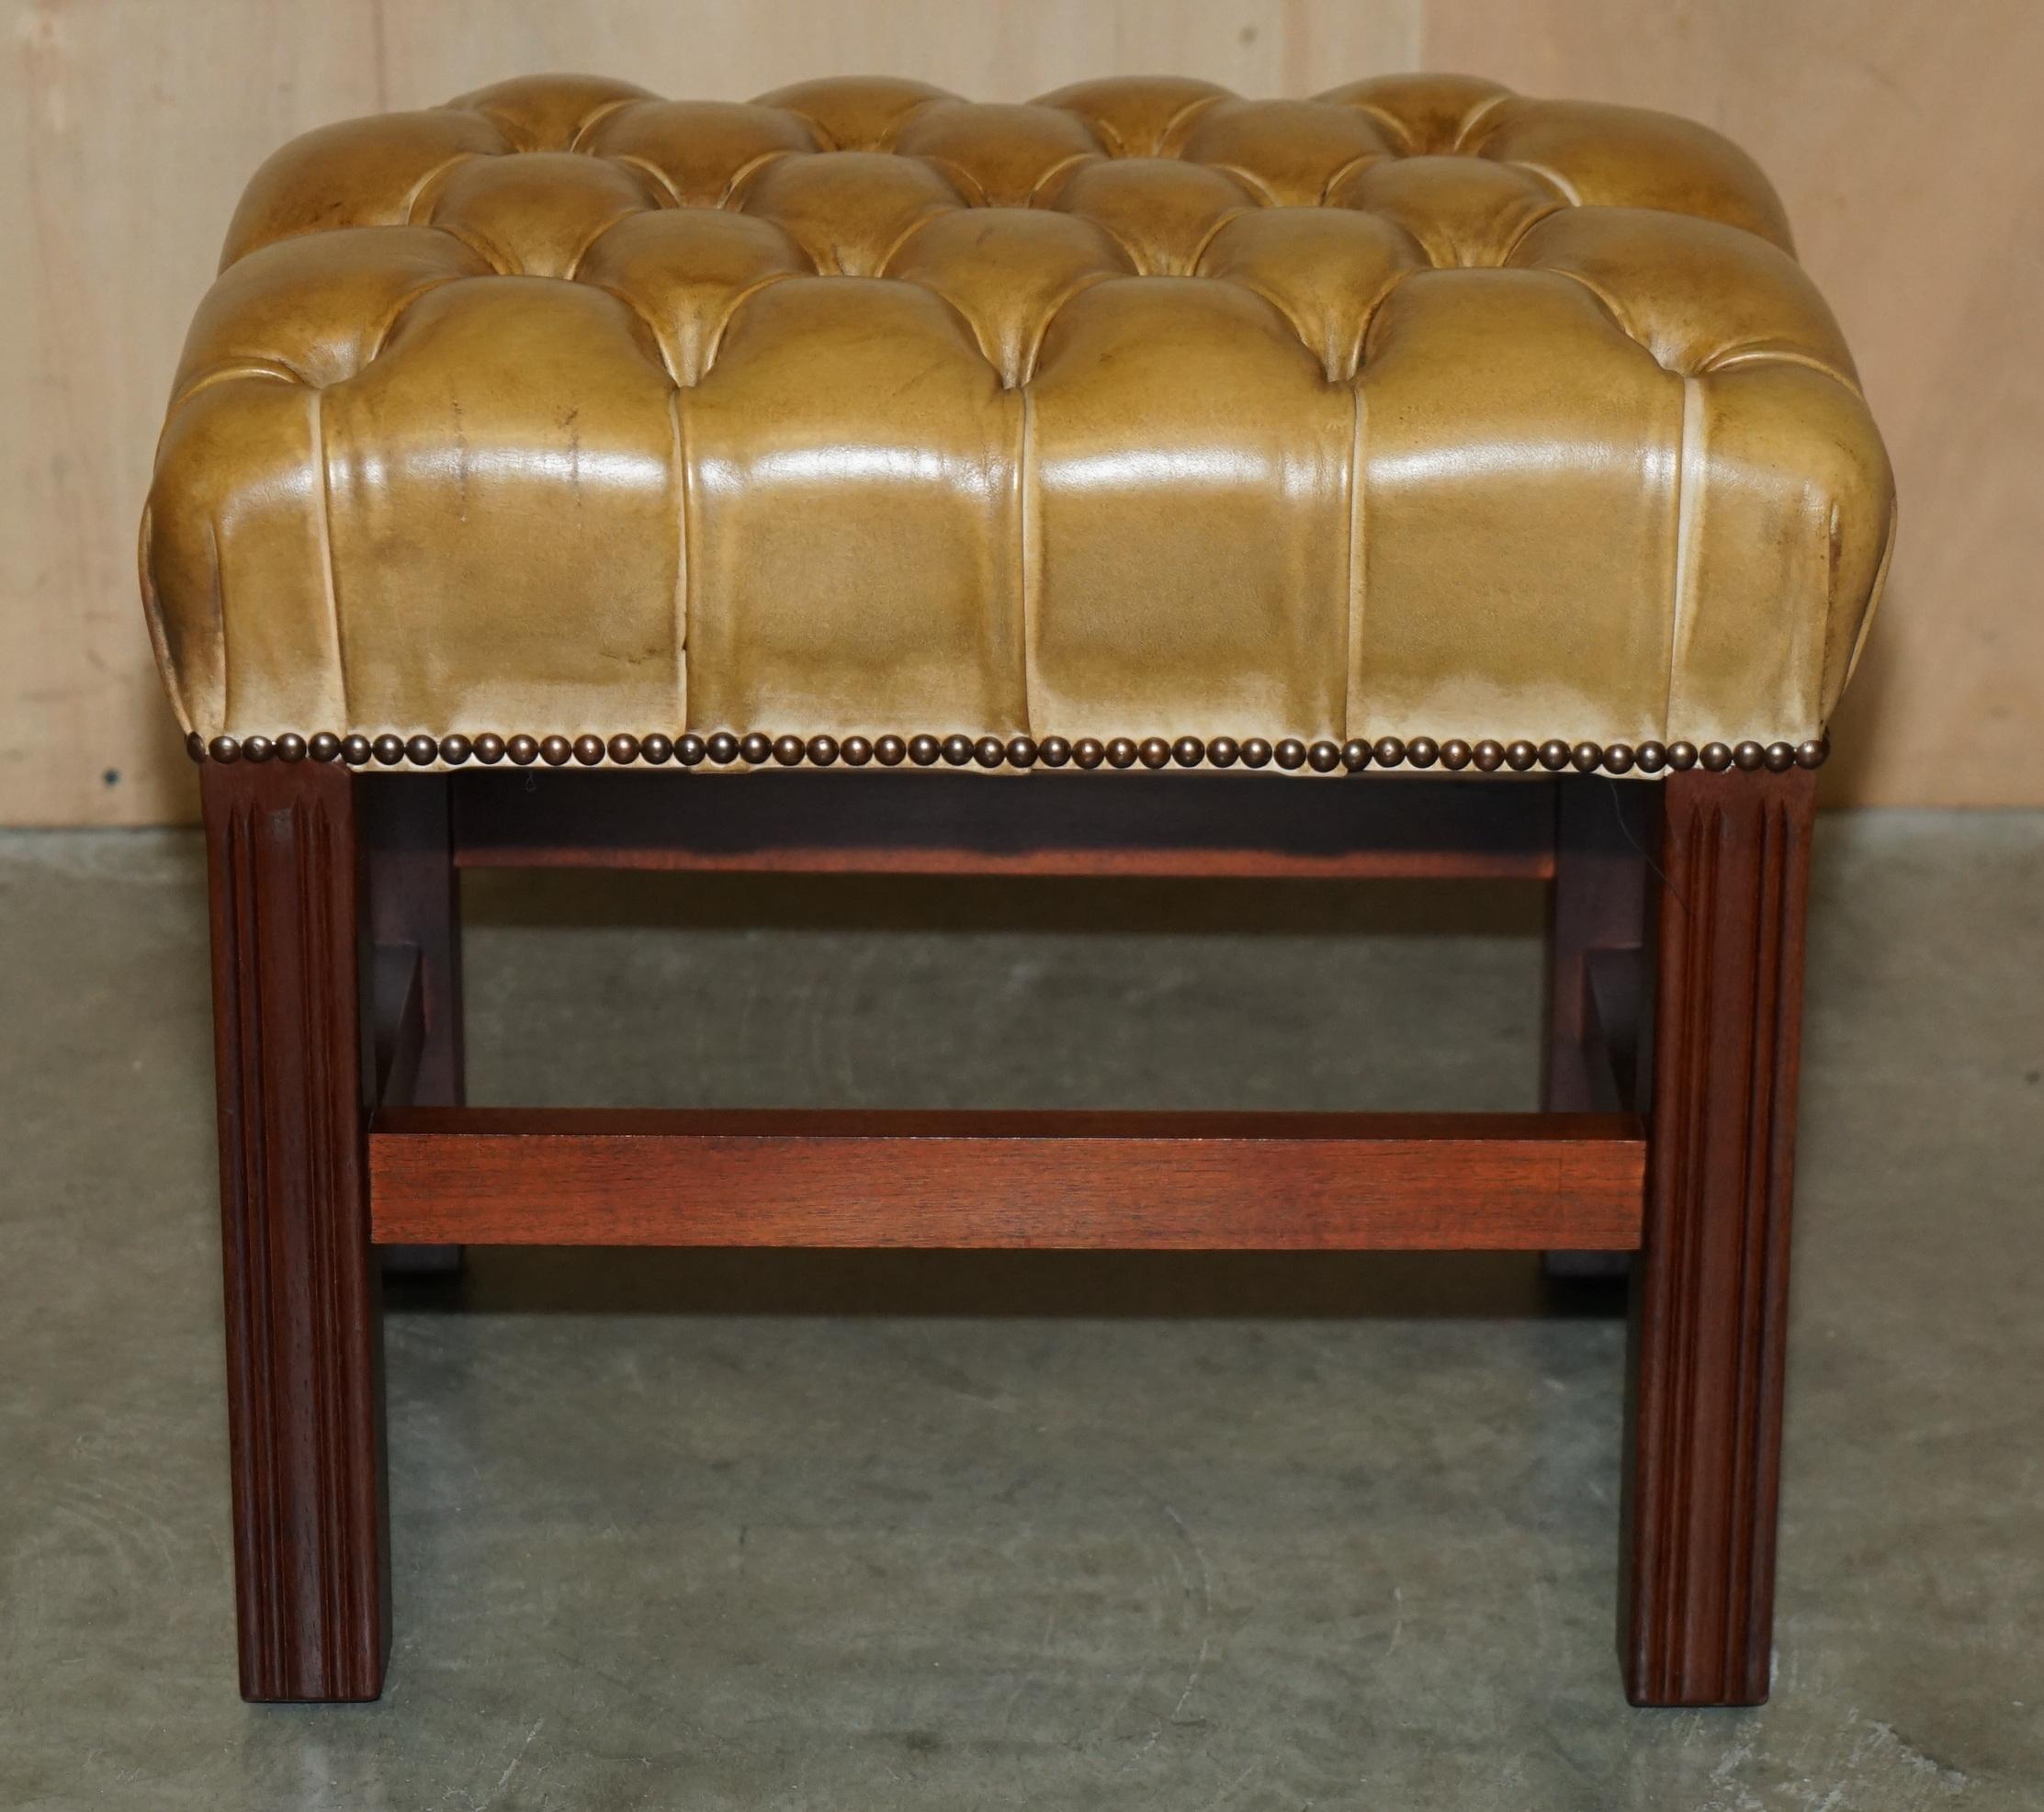 VINTAGE TAN BROWN LEATHER CHESTERFIELD TUFTED BARON FOOTSTOOL PART OF SUiTE For Sale 1